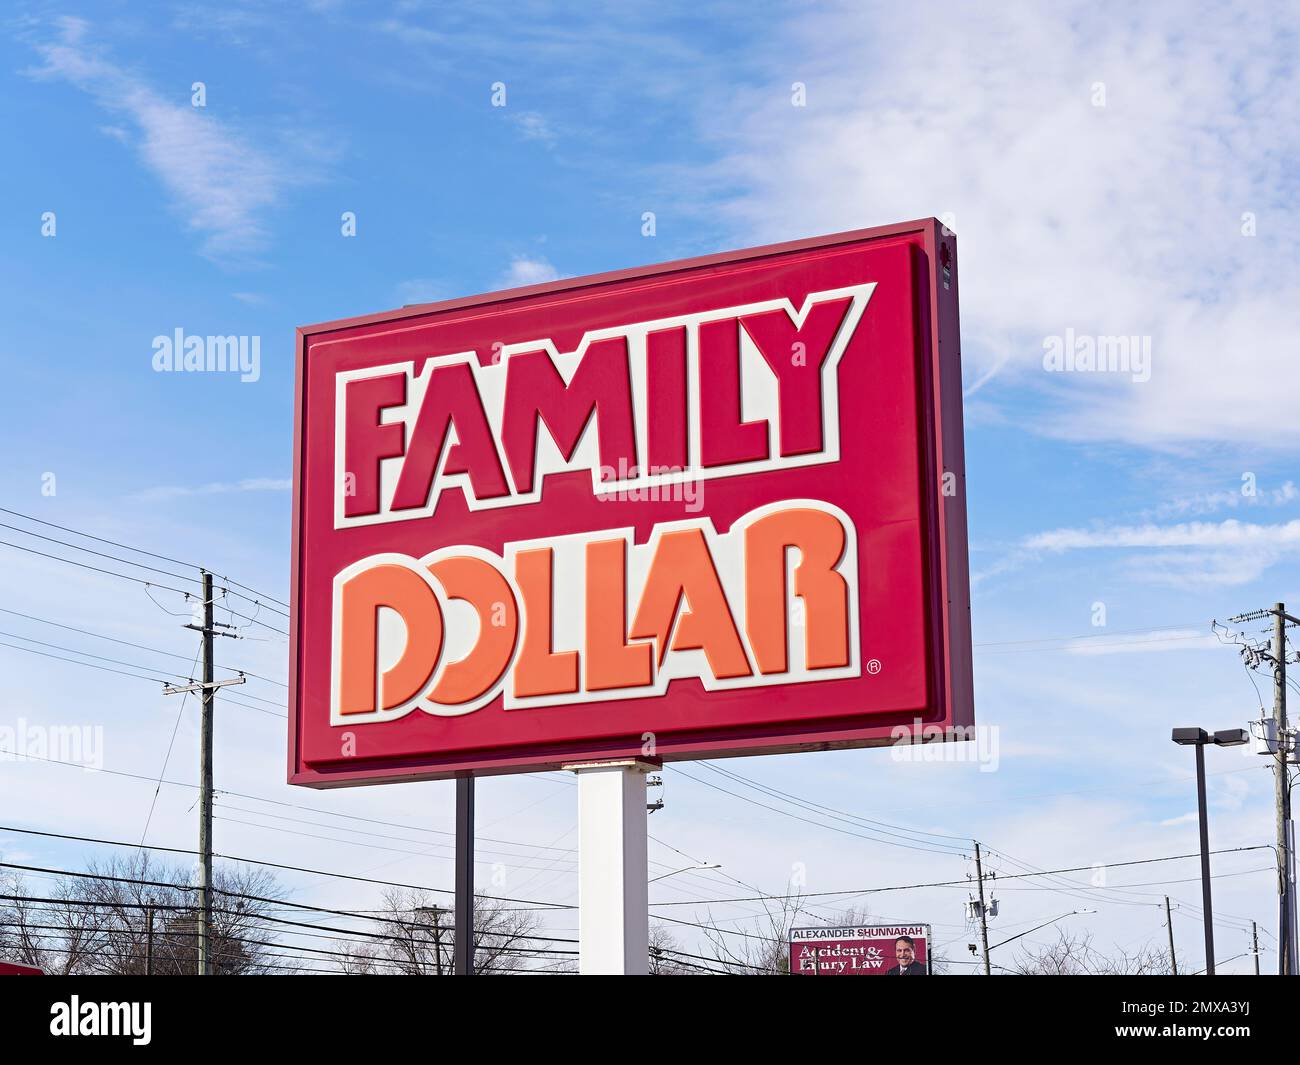 Family Dollar discount retail store sign in Montgomery Alabama, USA. Stock Photo